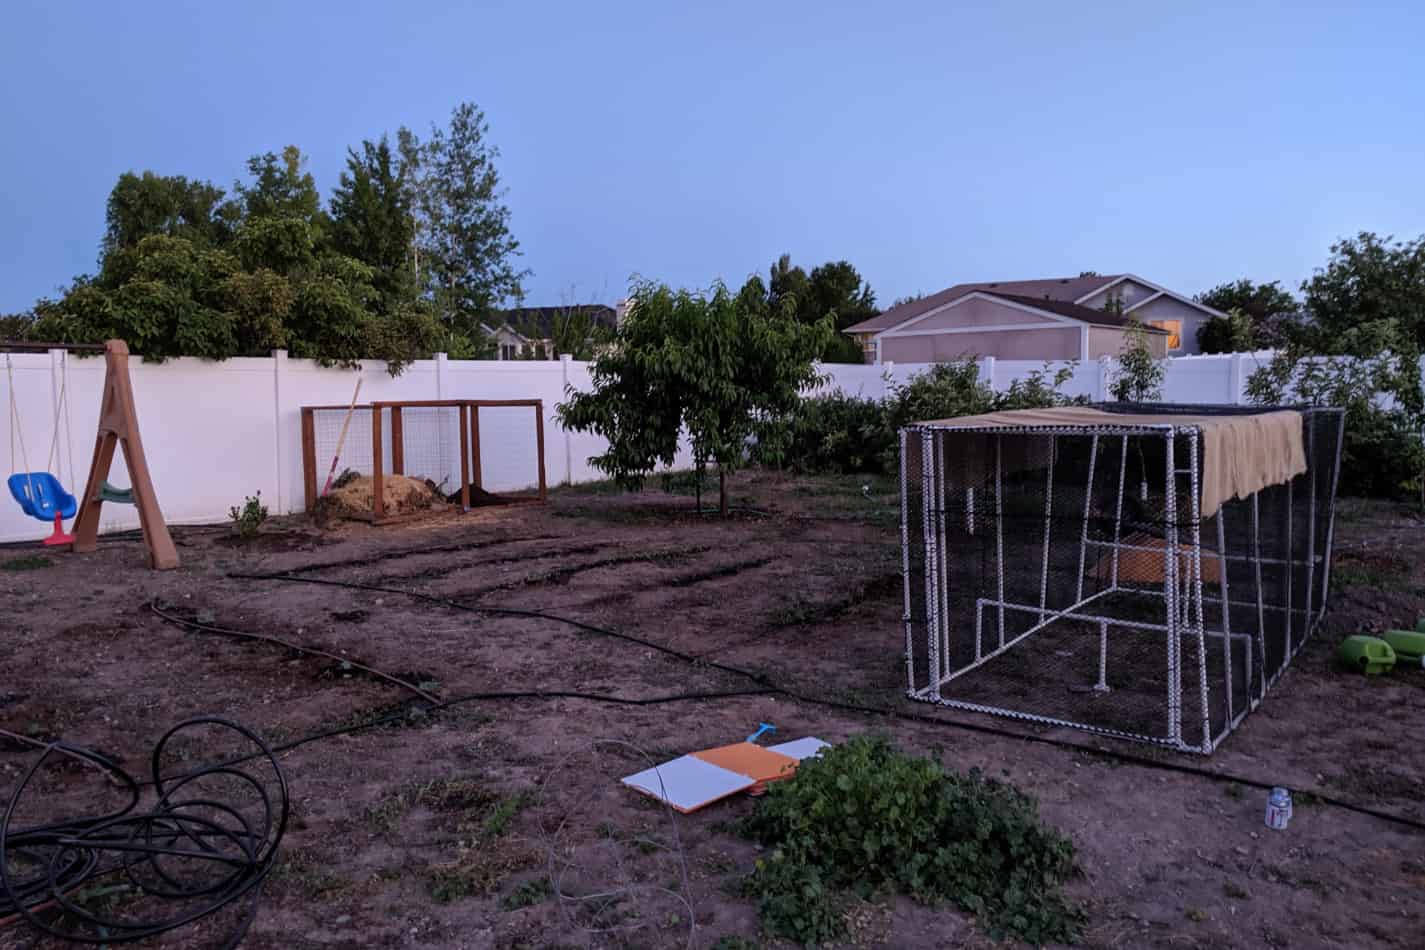 An image of the garden getting ready for planting and backyard homestead upgrades going on in spring 2020 at Starr's house.